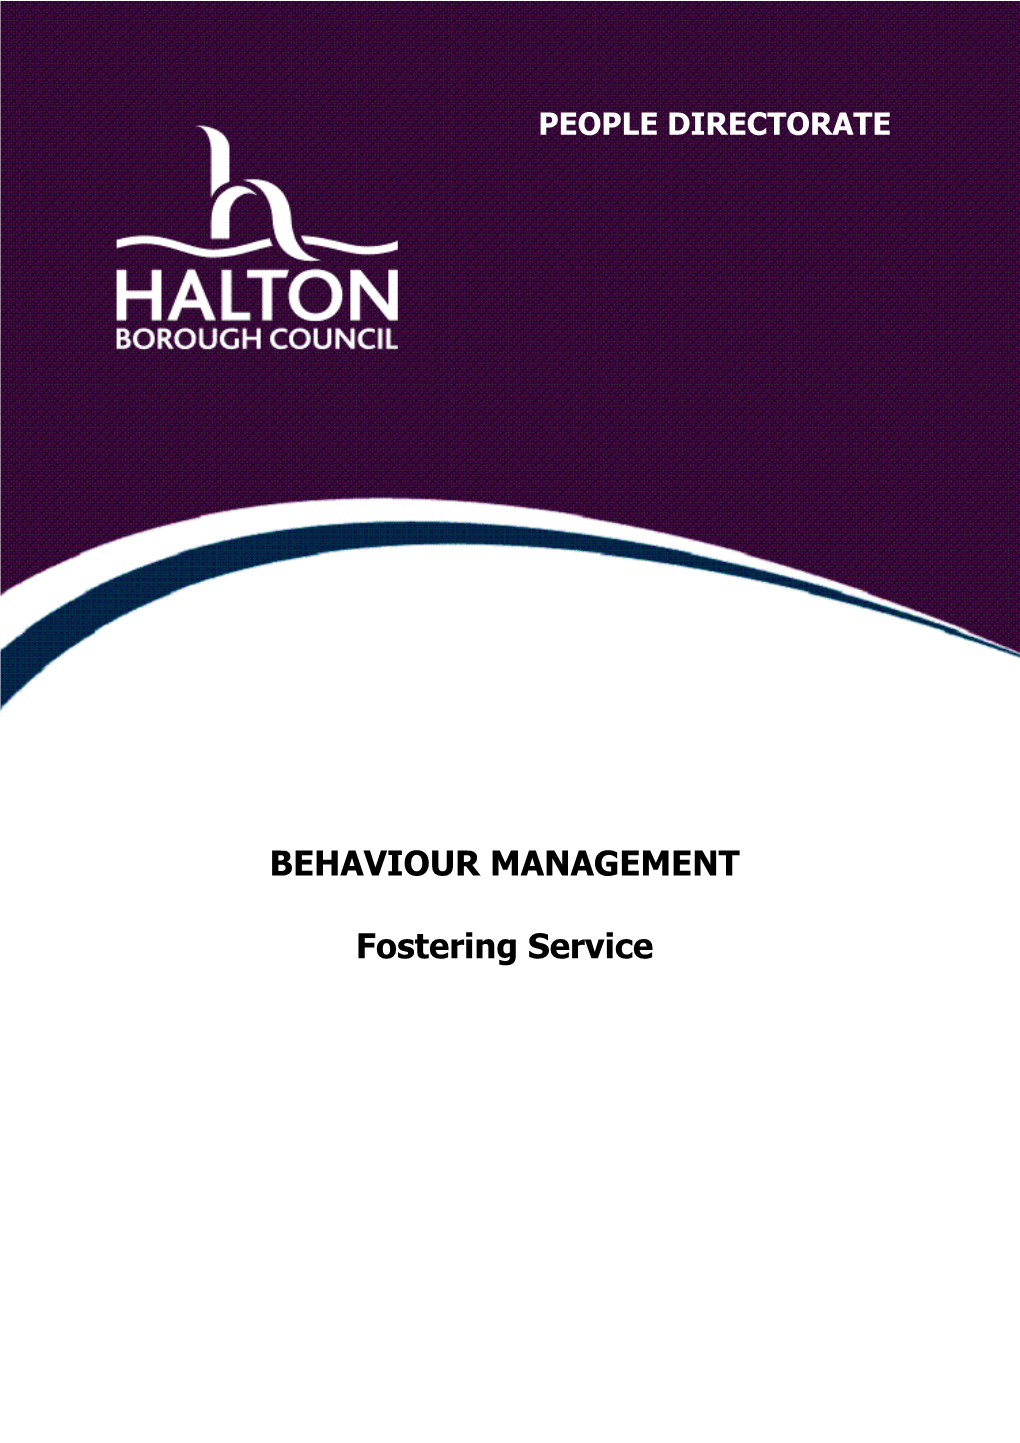 2.0Methods of Developing and Managing Levels of Acceptable Behaviour